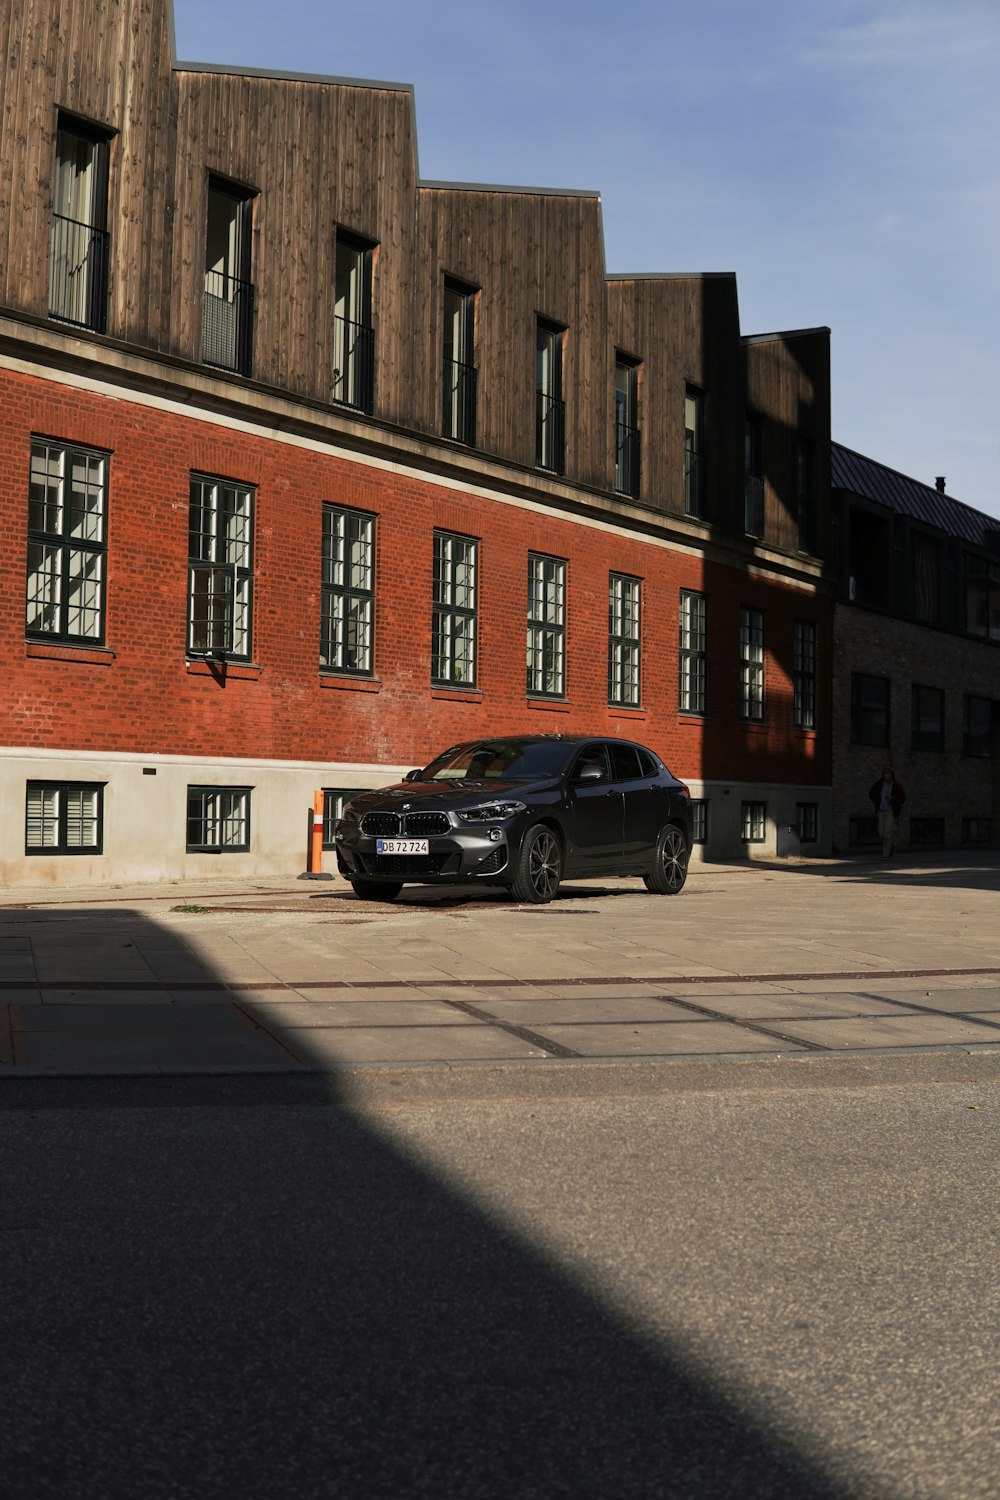 a black car parked in front of a red brick building